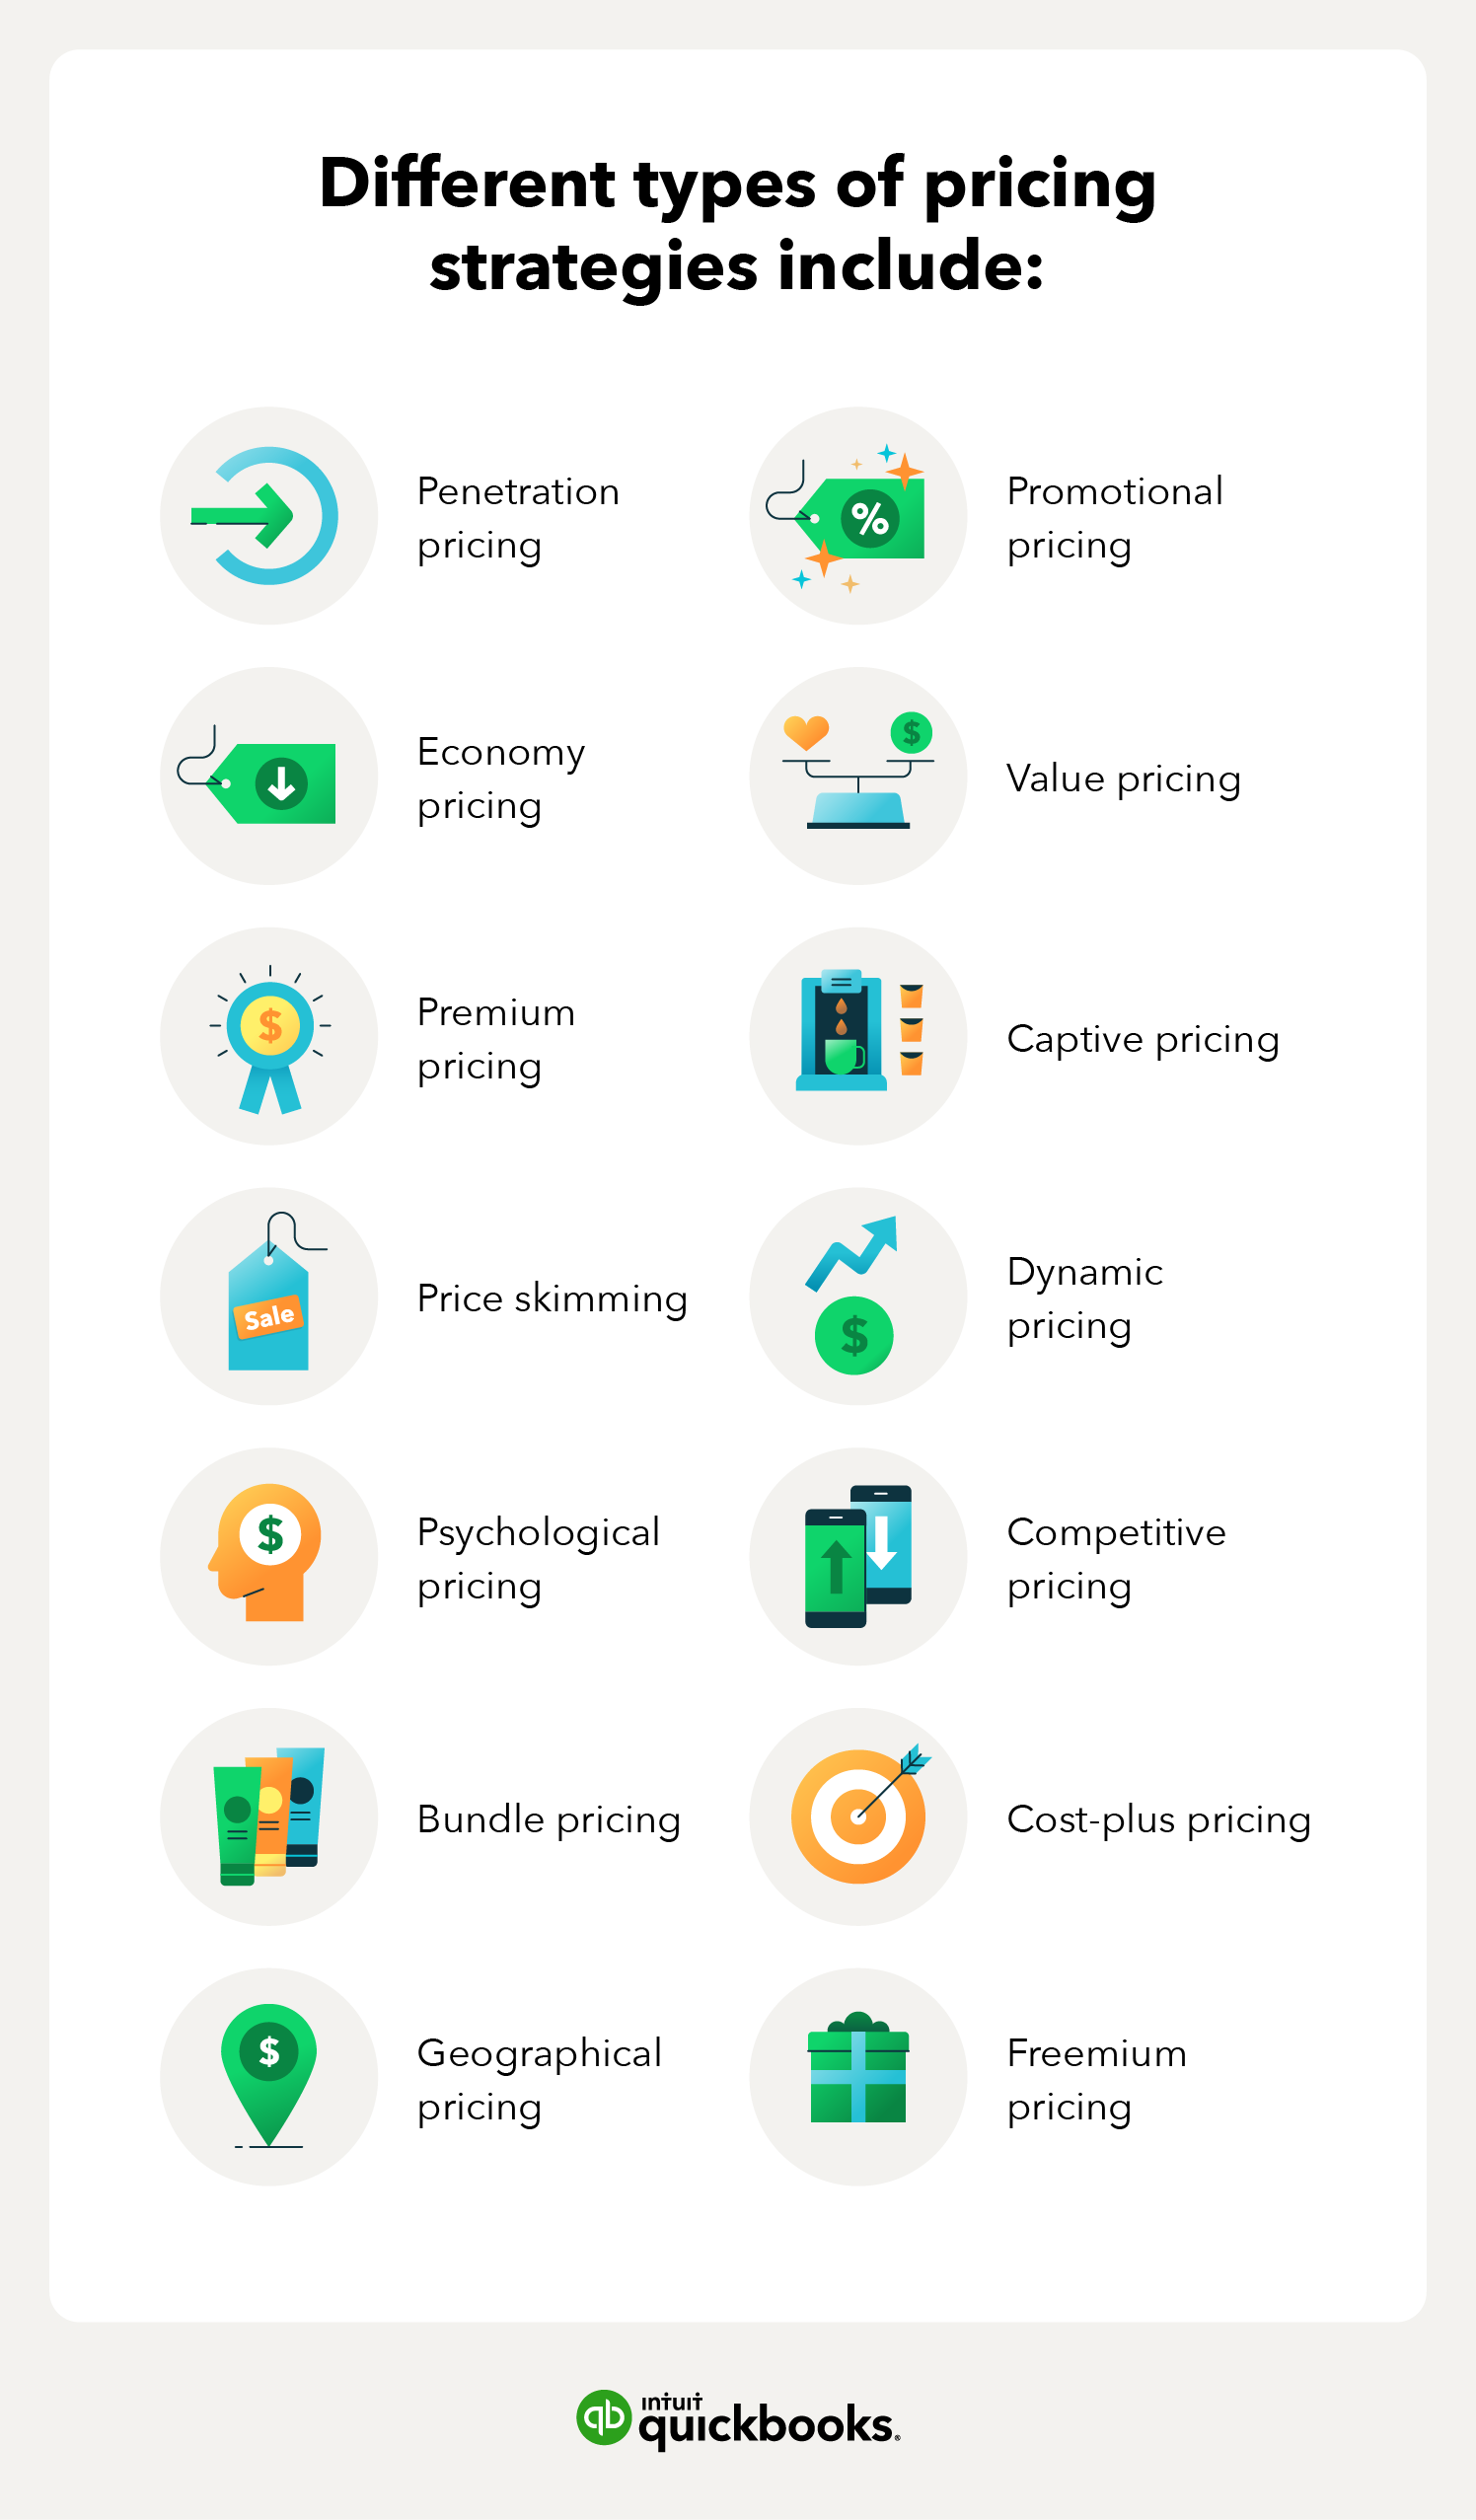 pricing strategy case study examples